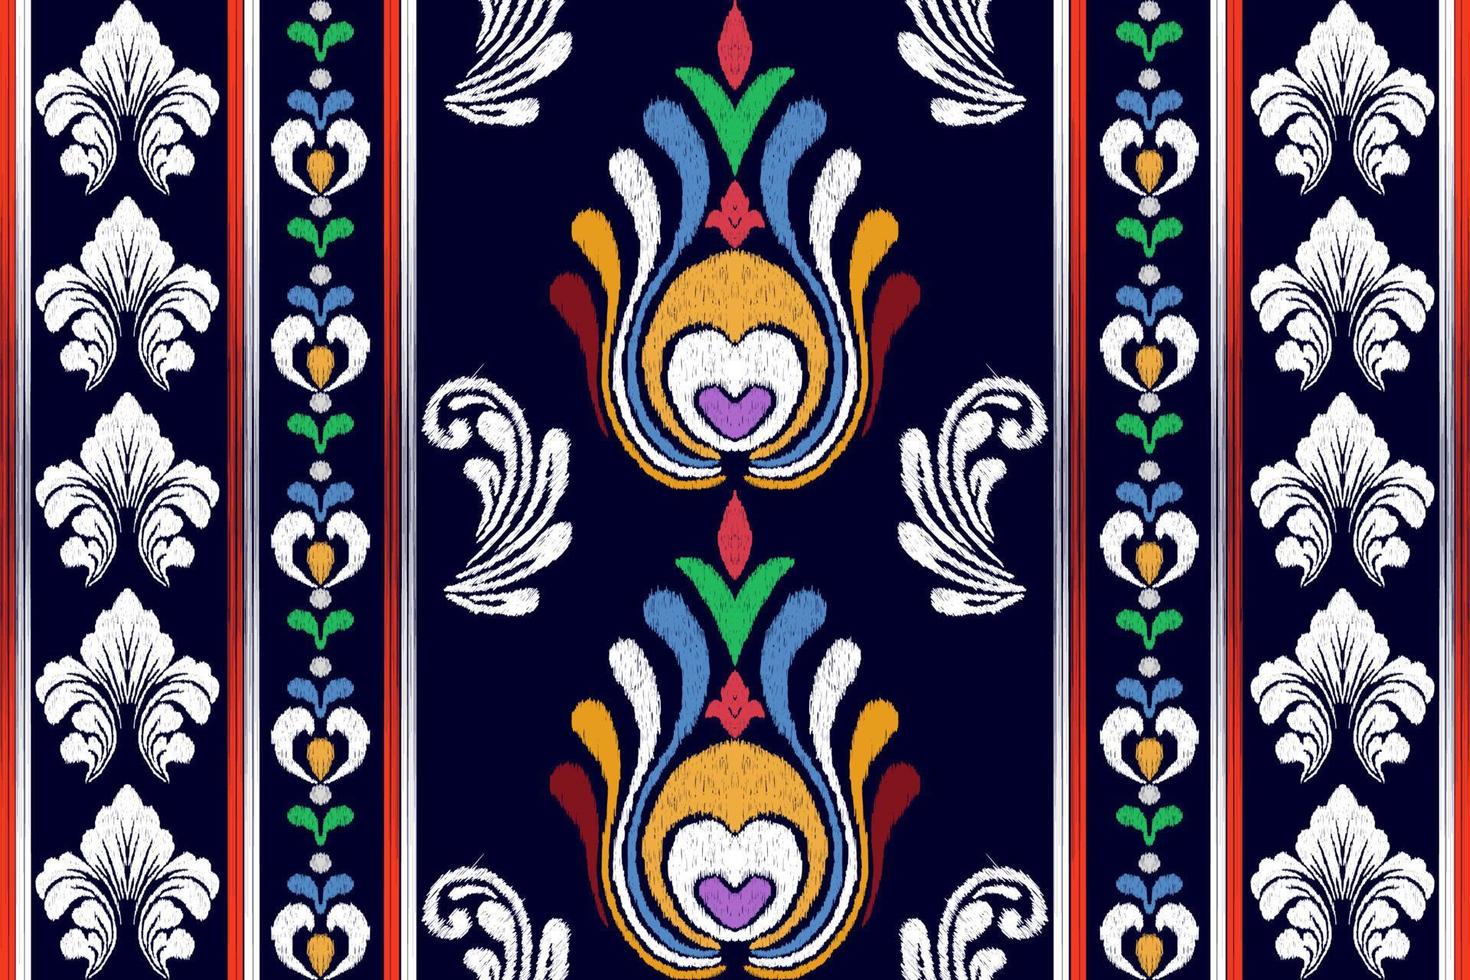 patchwork floral pattern with paisley and indian flower motifs. damask style pattern for textil and decoration vector